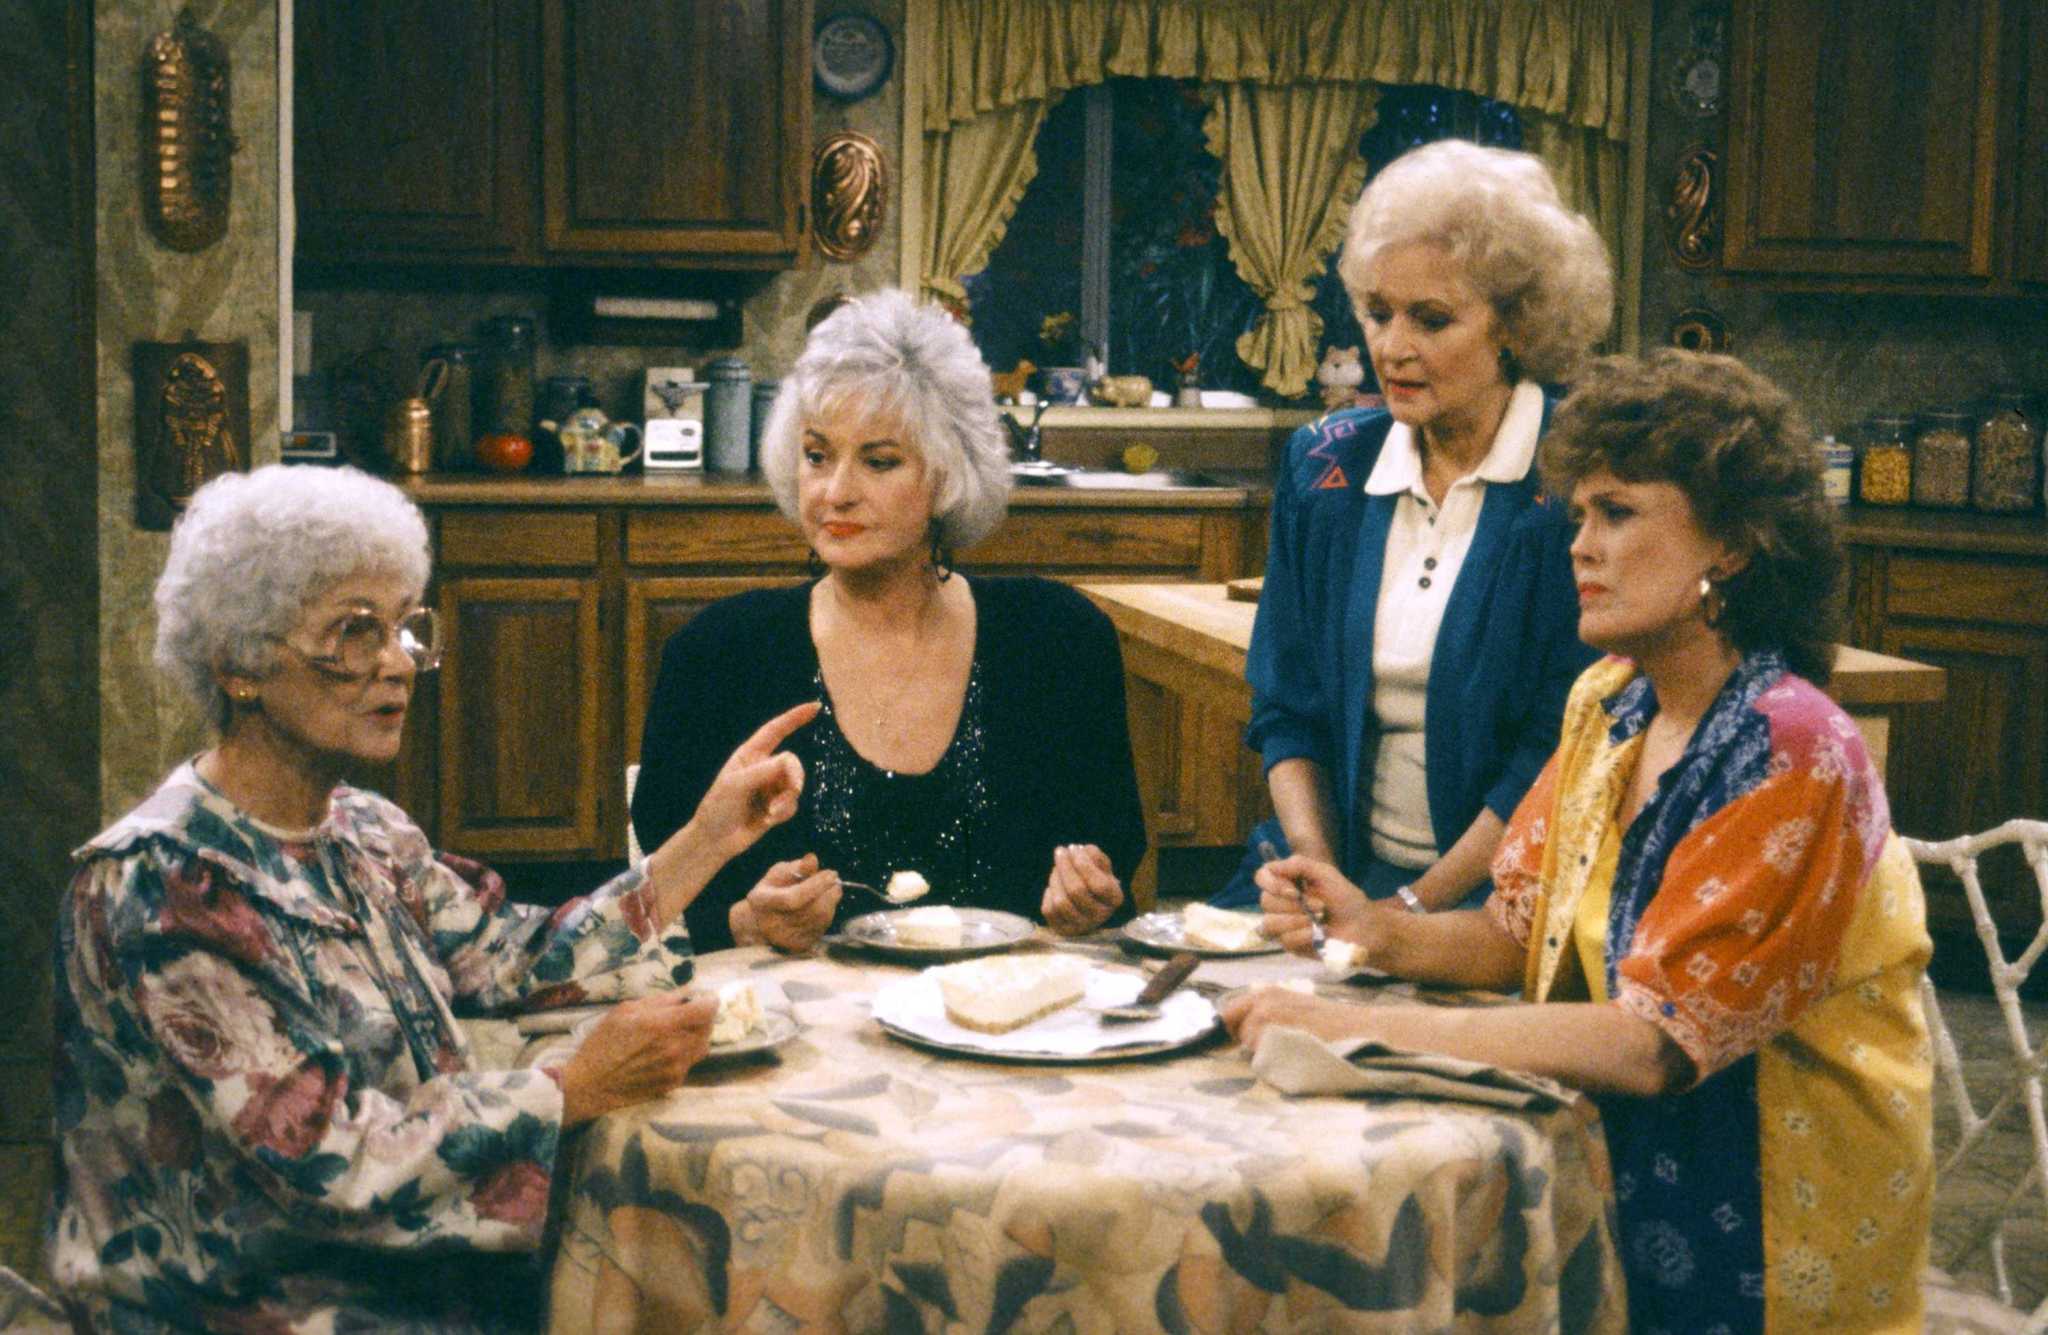 The Golden Girls' House - Location, Value, and History of Blanche